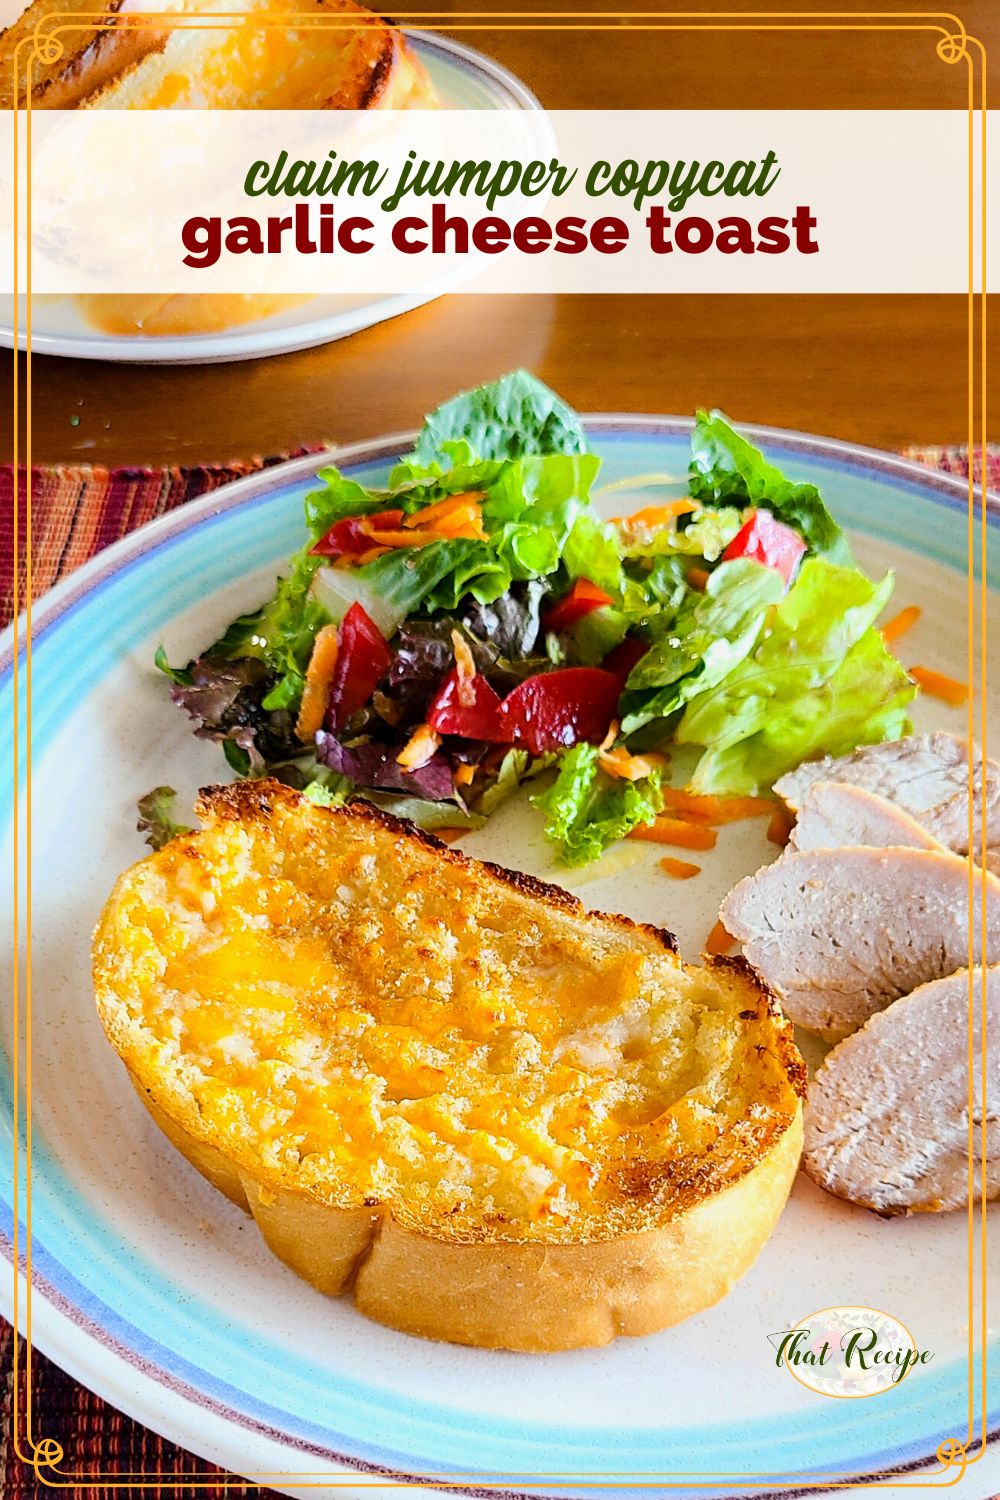 cheese bread on a plate with text overlay "claim jumper copycat garlic cheese toast"